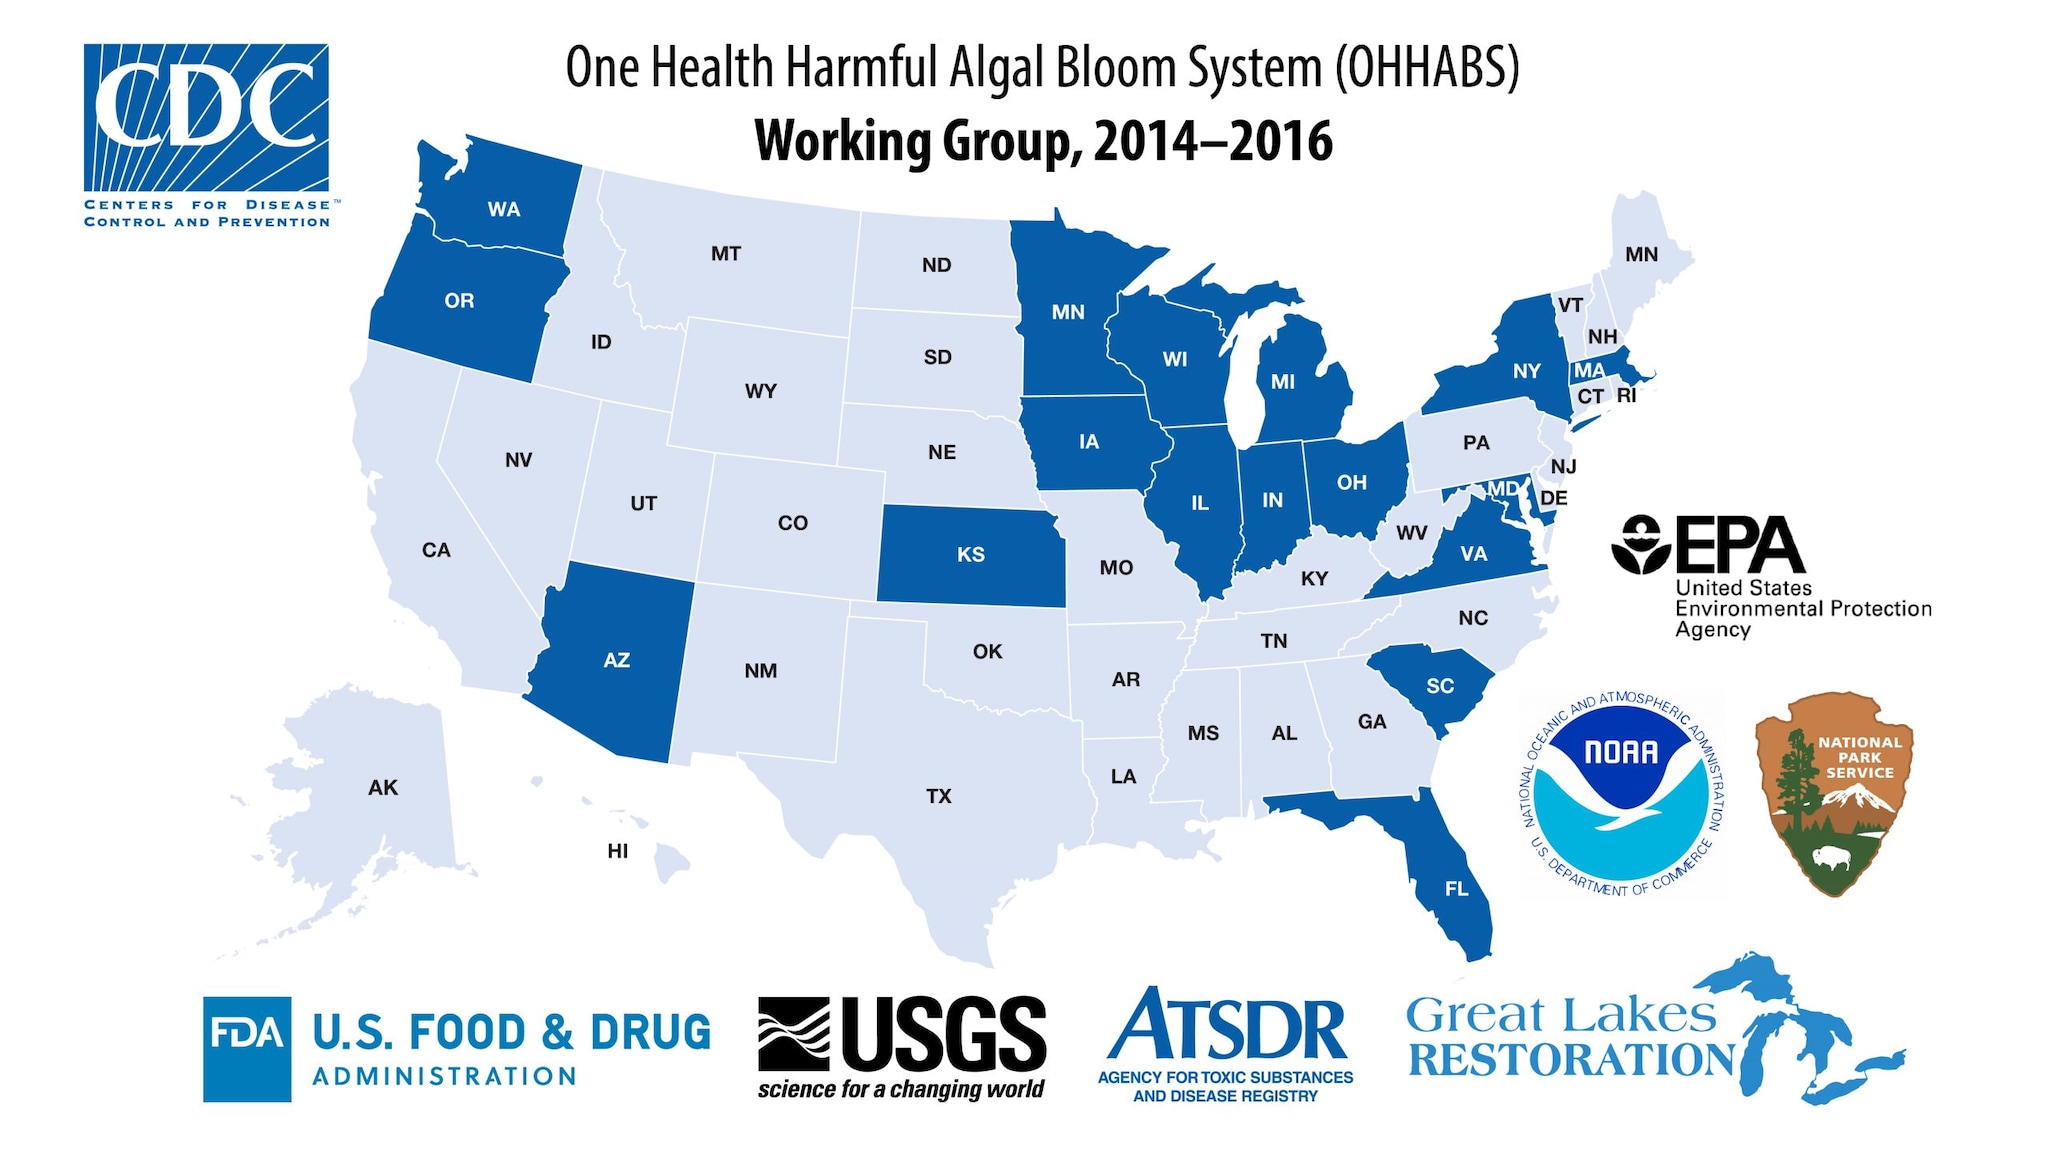 2014-2016 OHHABS working group state and federal partners